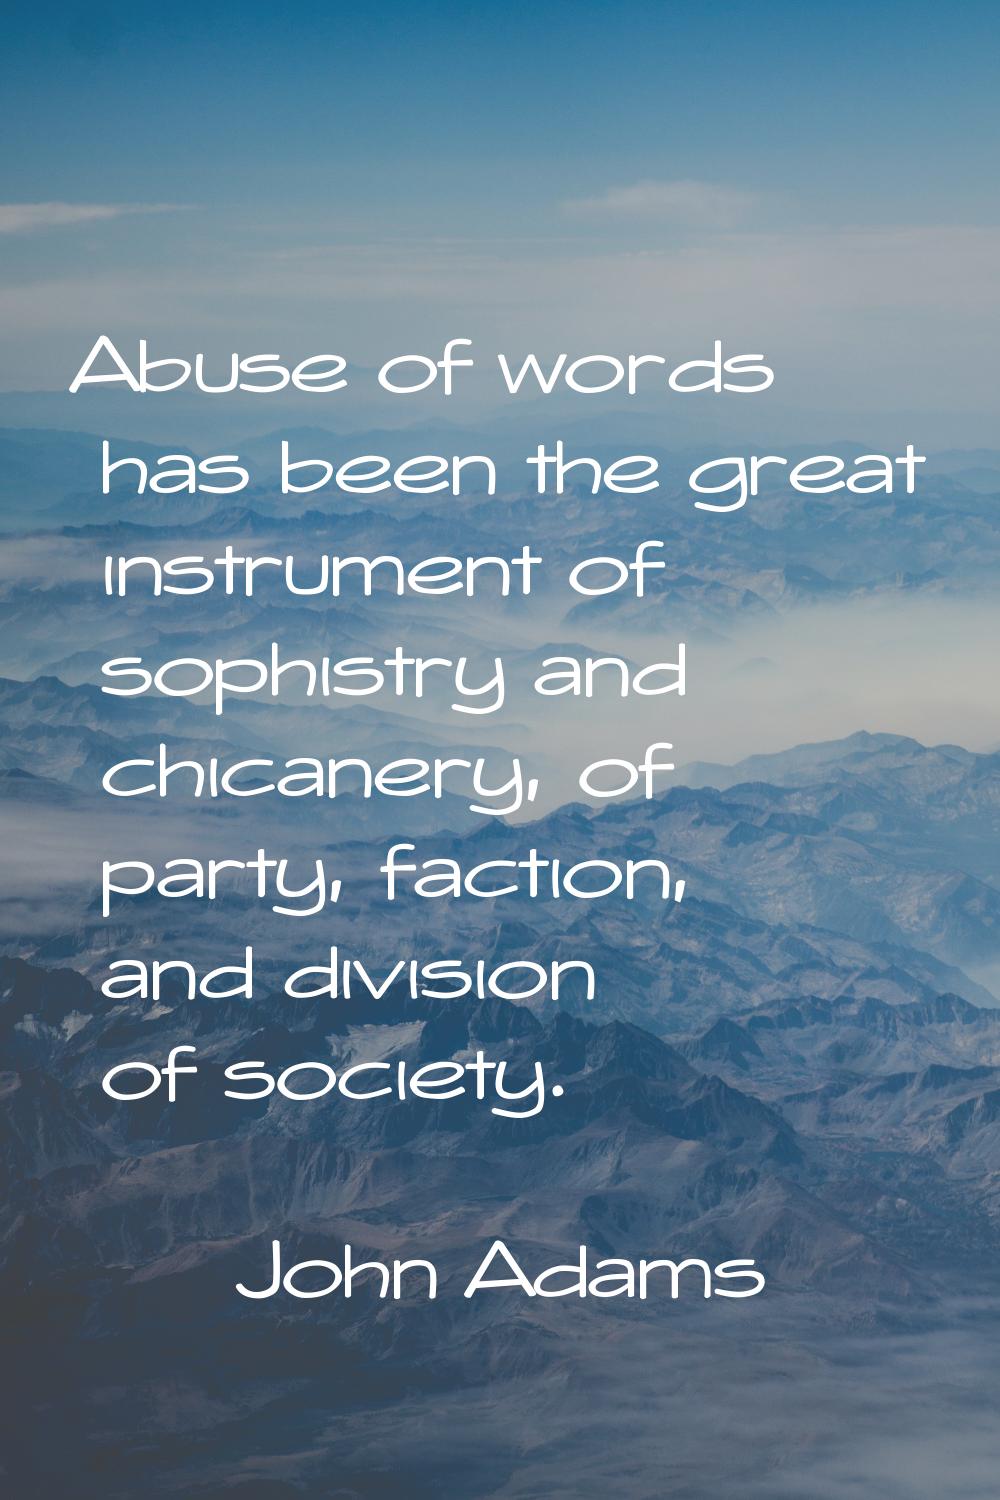 Abuse of words has been the great instrument of sophistry and chicanery, of party, faction, and div